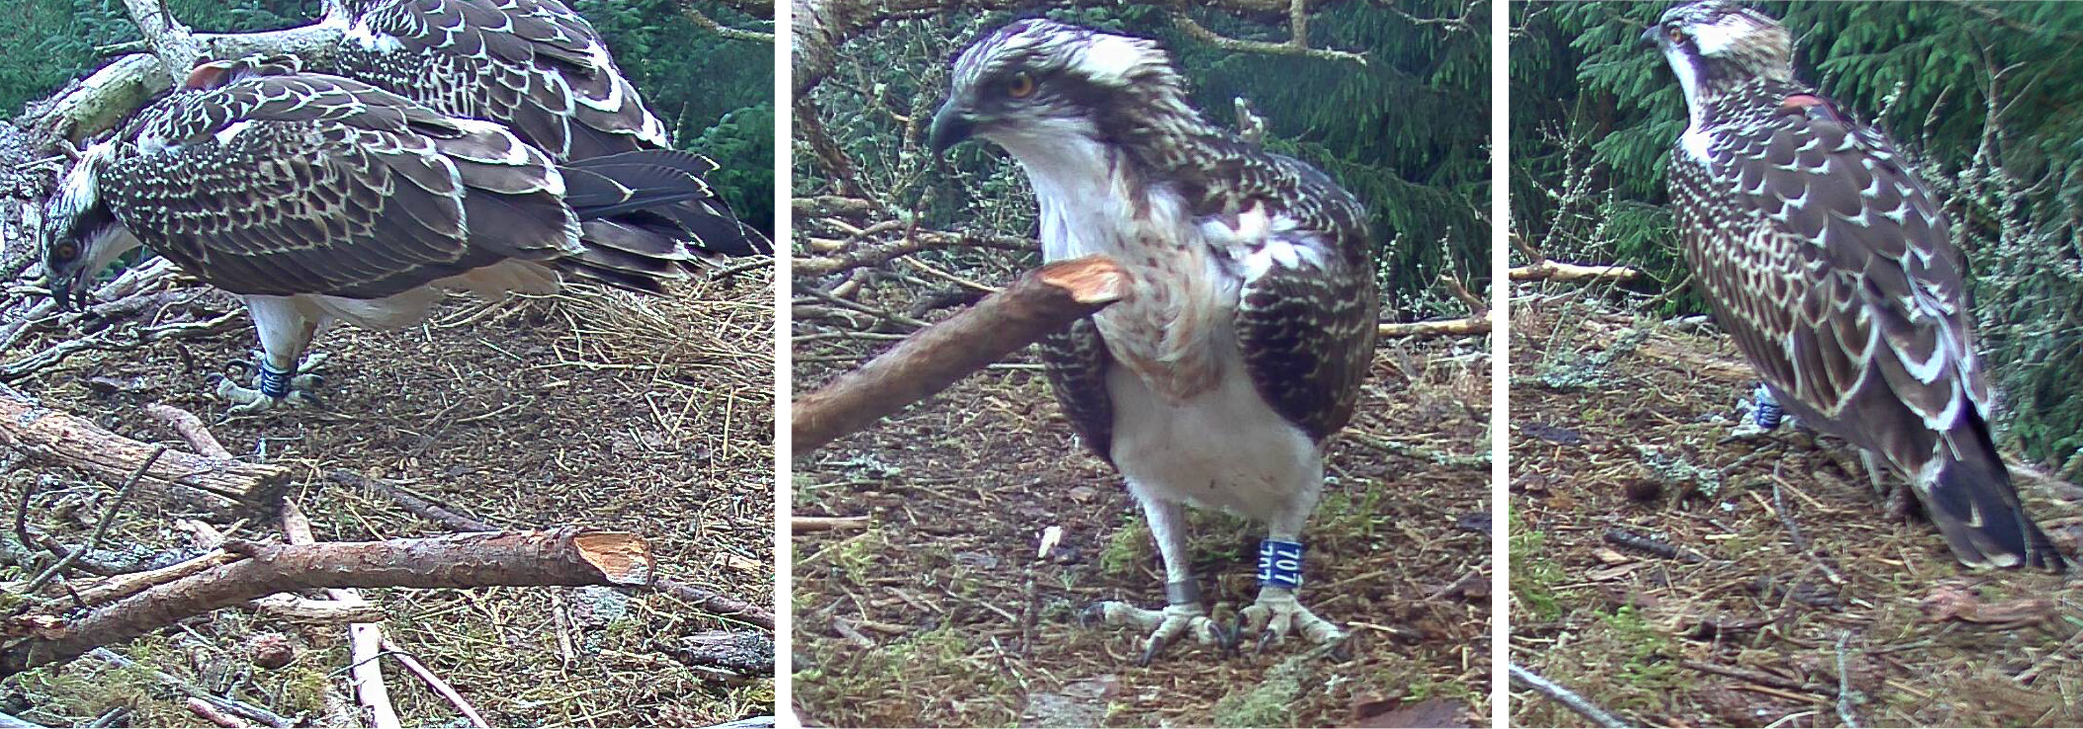 three individual osprey images in a line